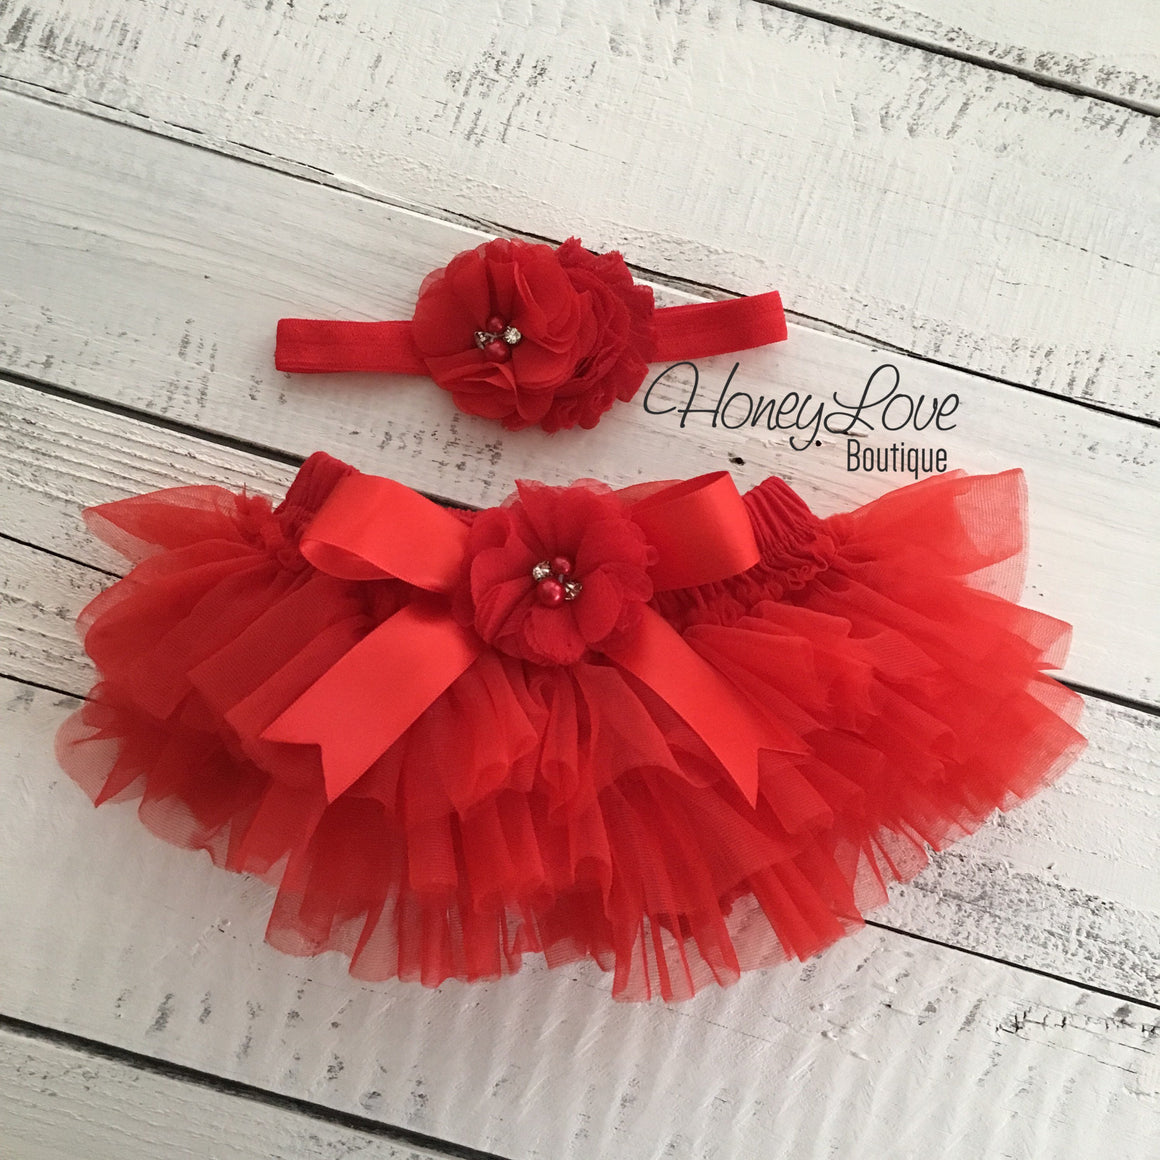 PERSONALIZED Name Outfit - Red and Gold Glitter - Red flower embellished tutu skirt bloomers - HoneyLoveBoutique